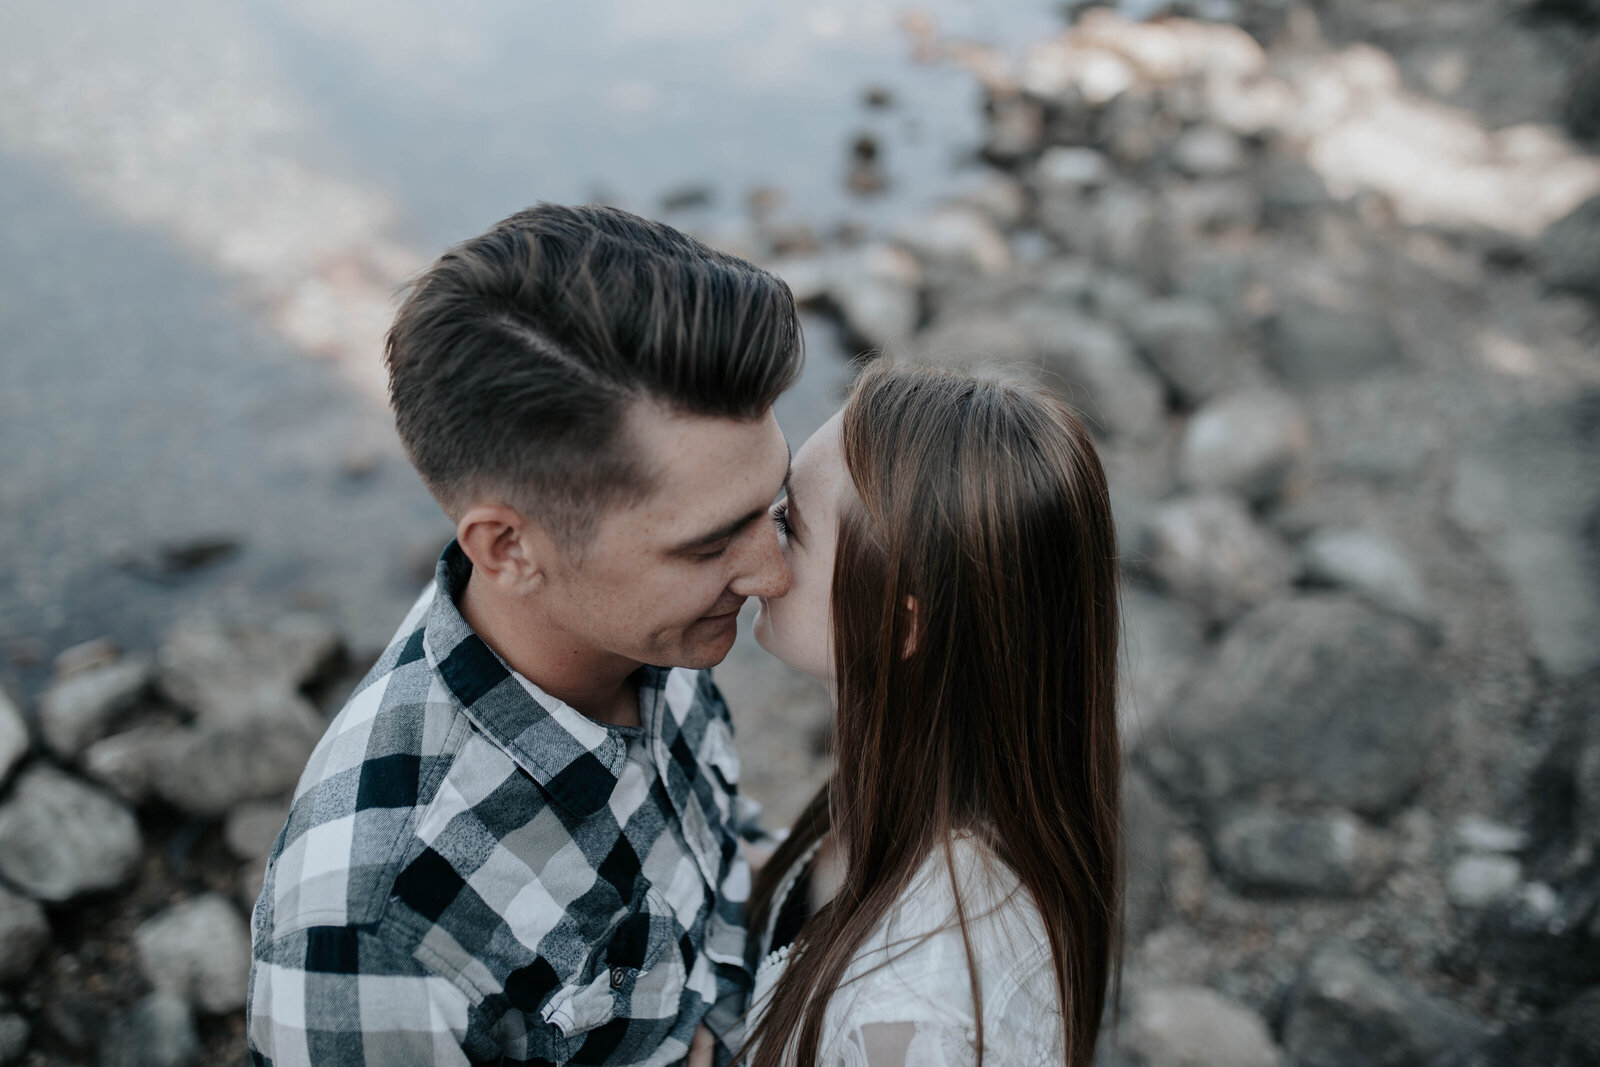 engagement photos at a lake with man and woman leaning in to kiss each other while smiling captured by Idaho Falls wedding photographer